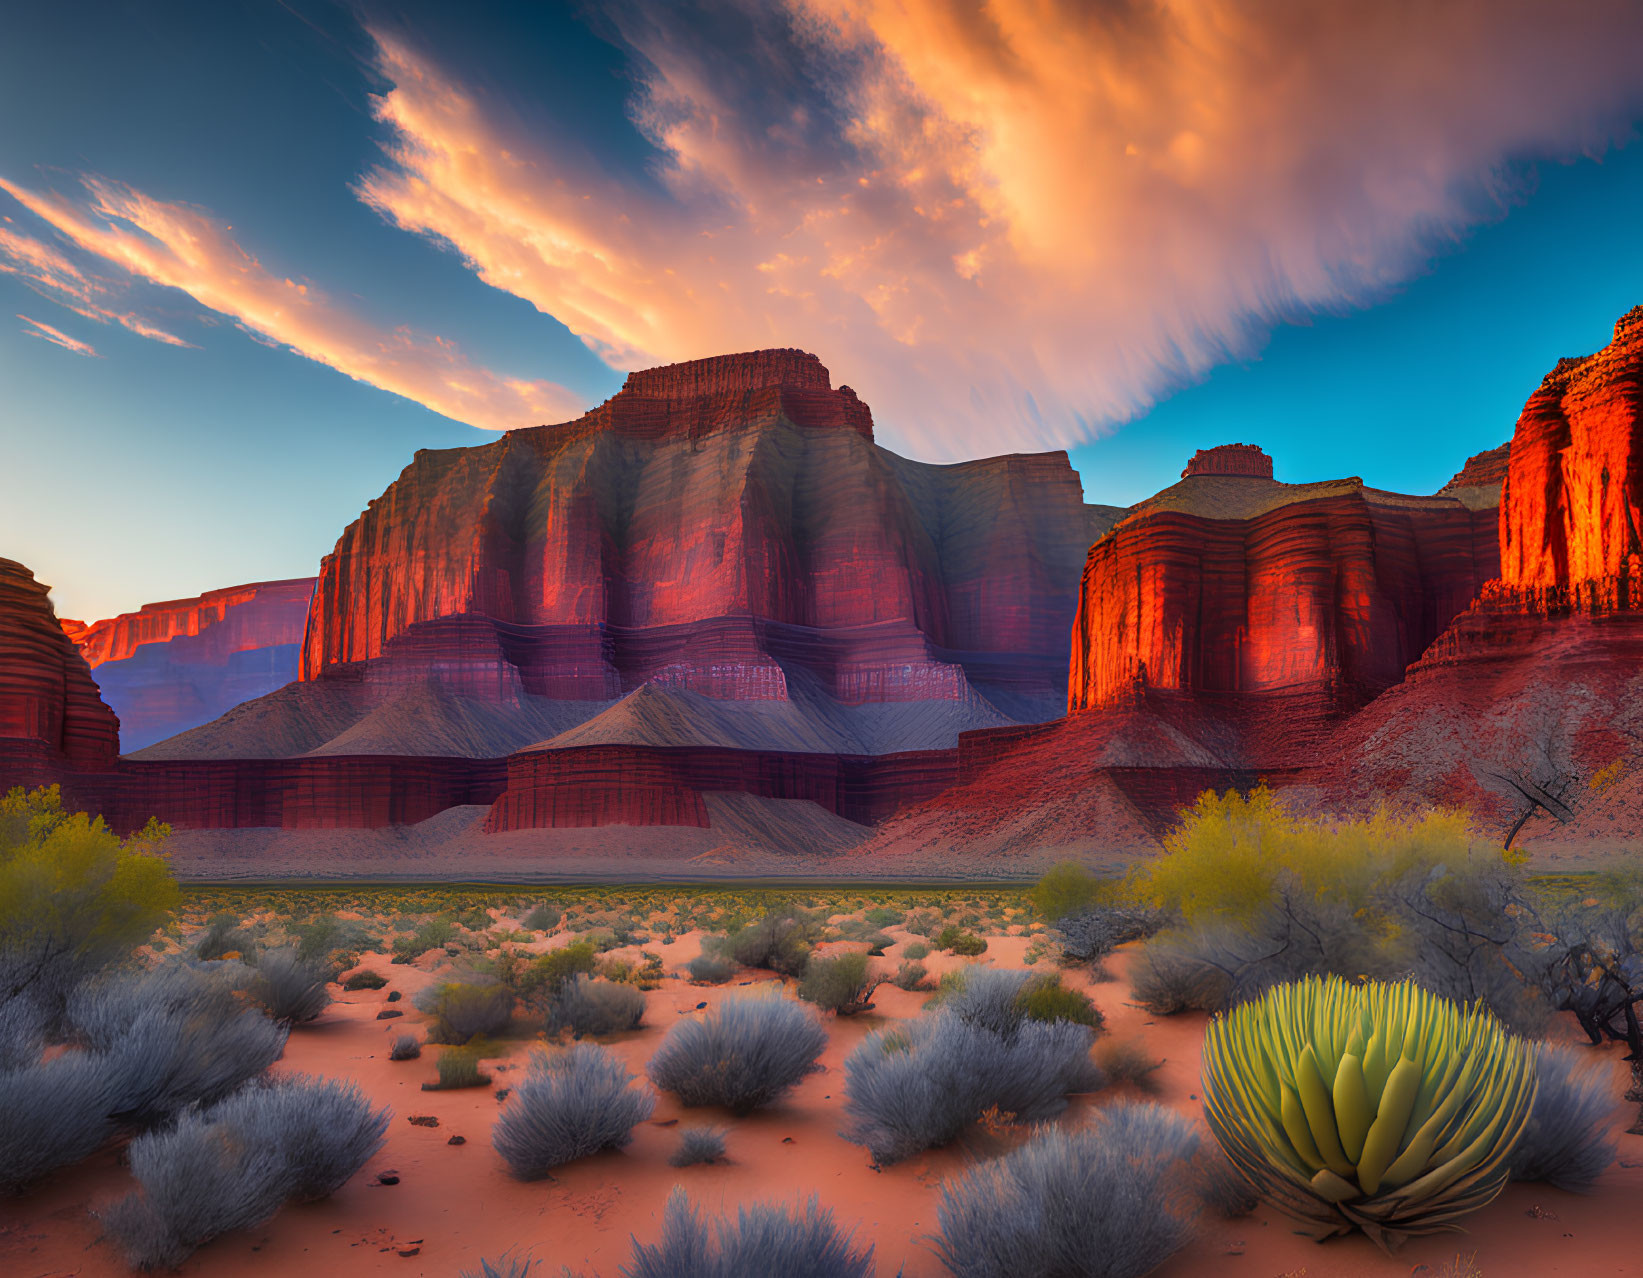 Scenic desert sunset with red rock formations and dramatic sky